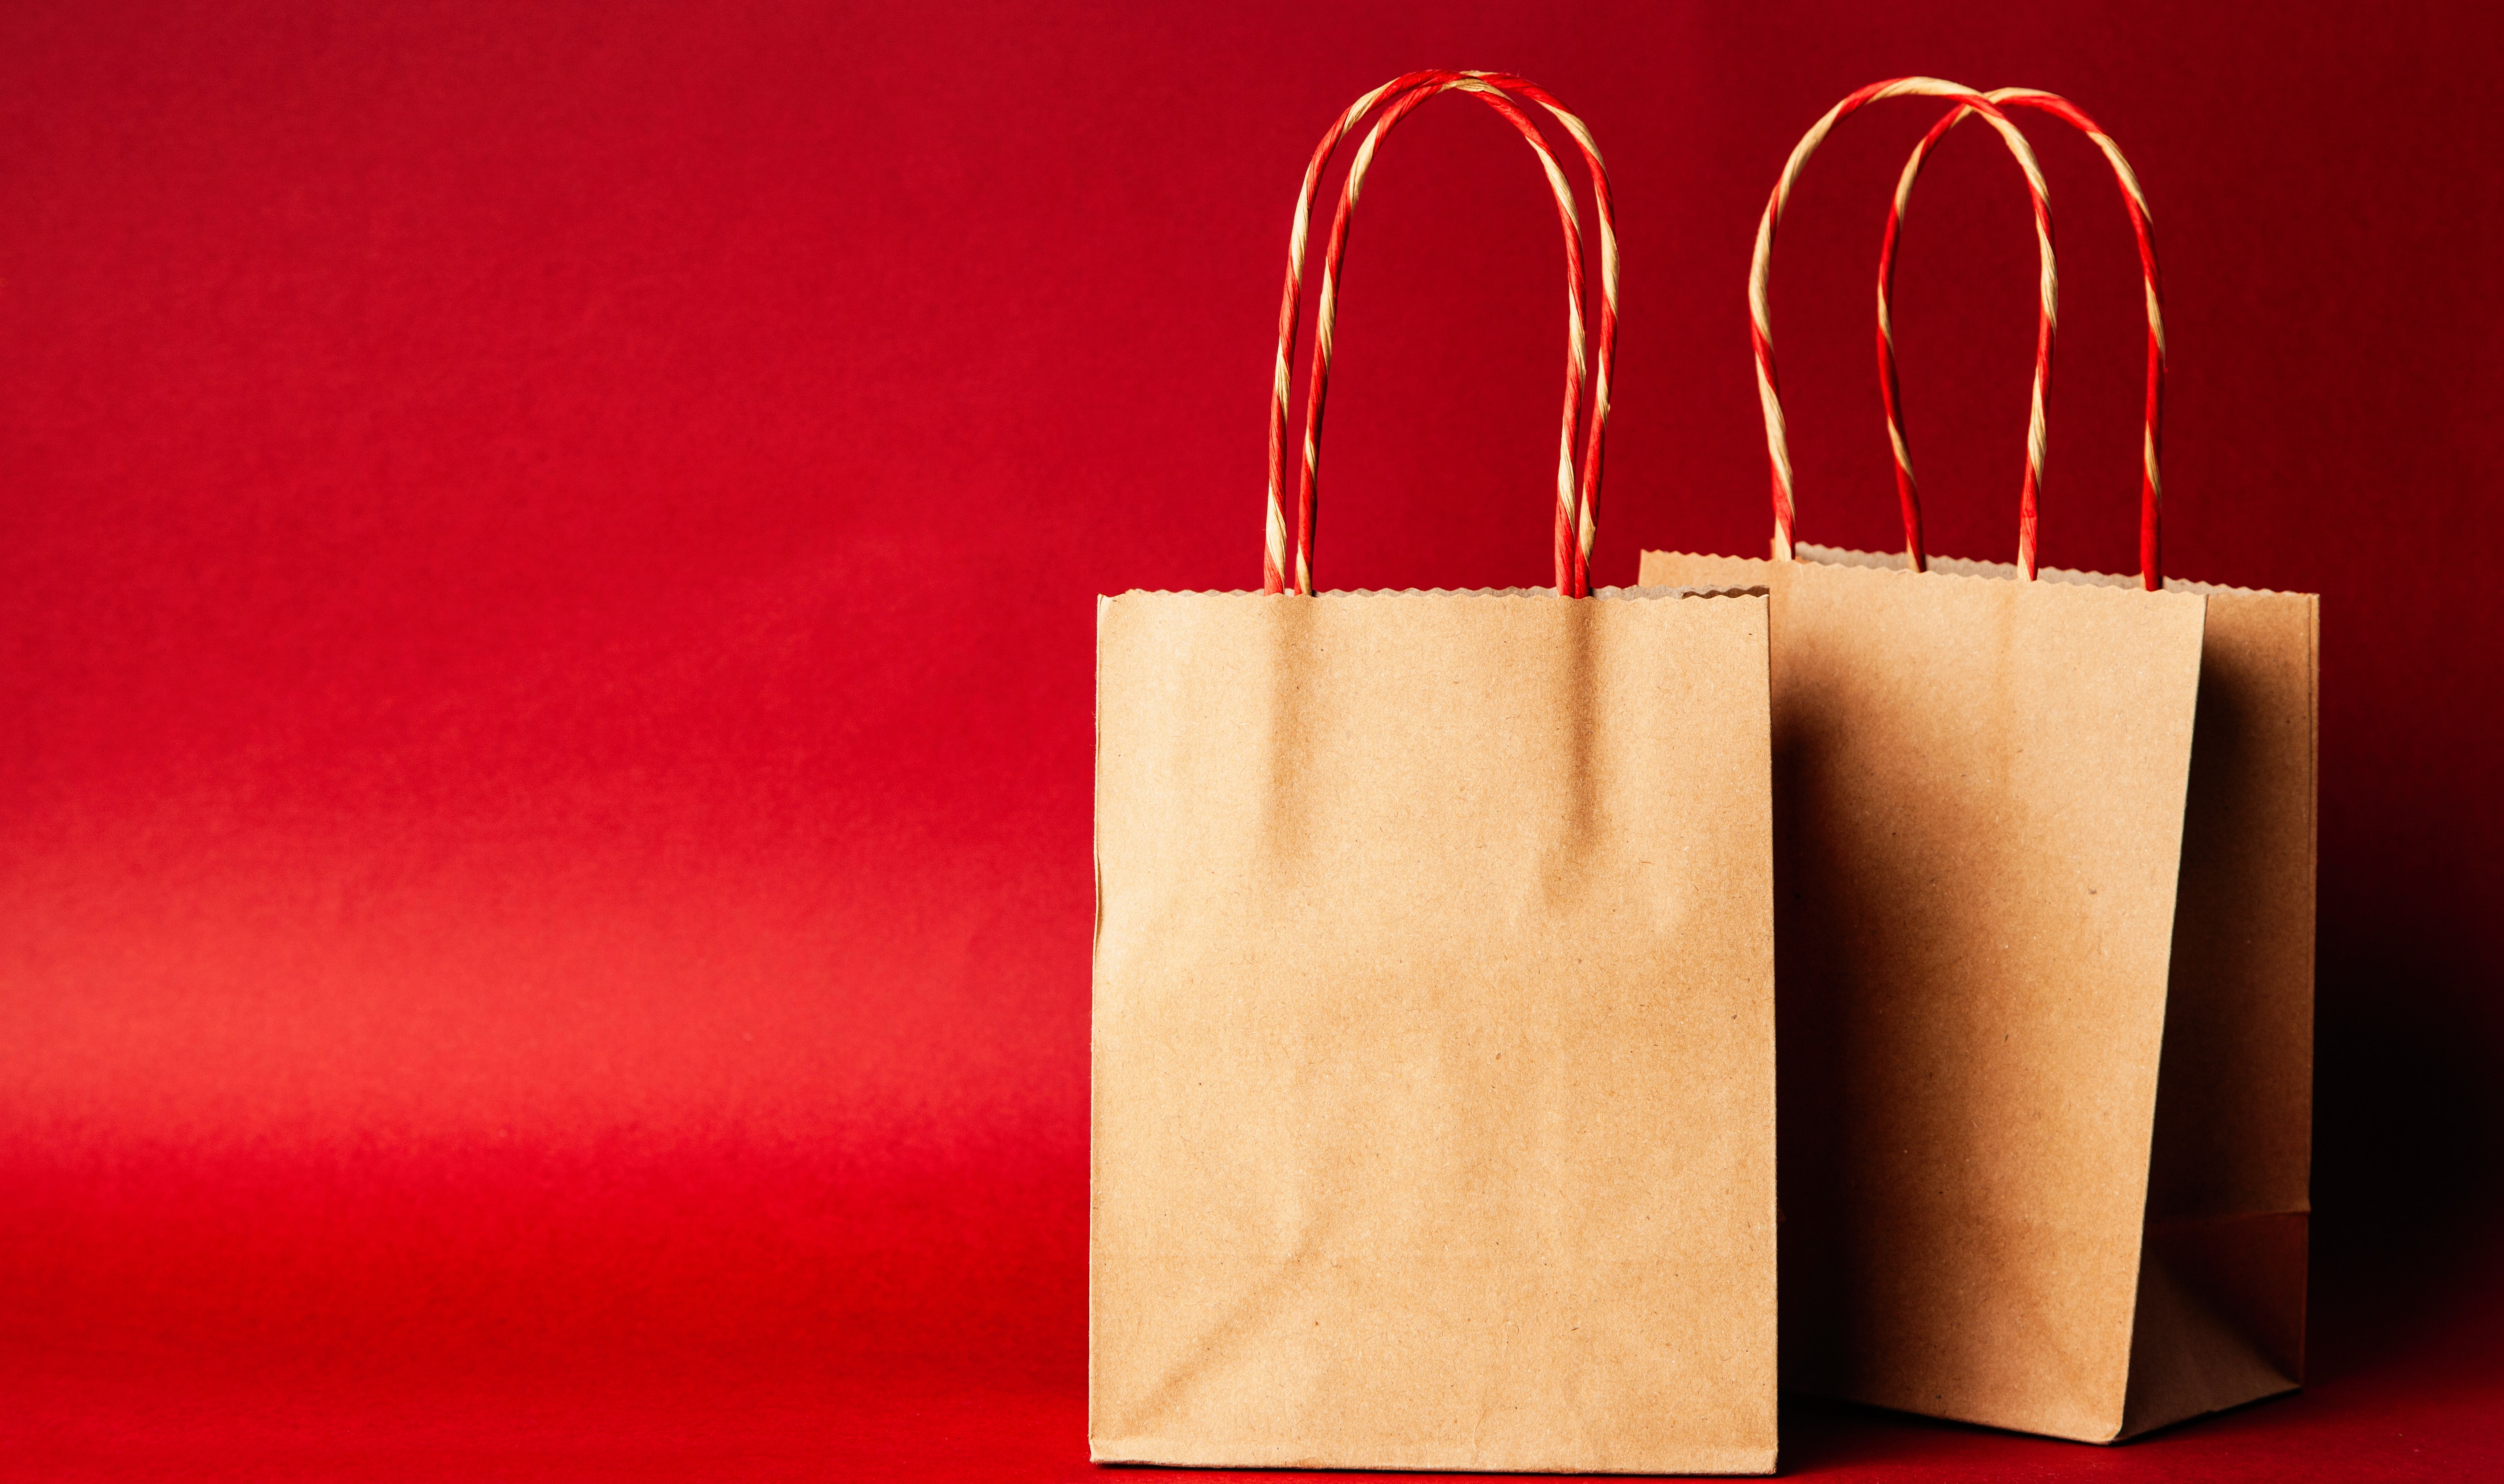 Best Shopping Bag Photo · 100% Free Downloads